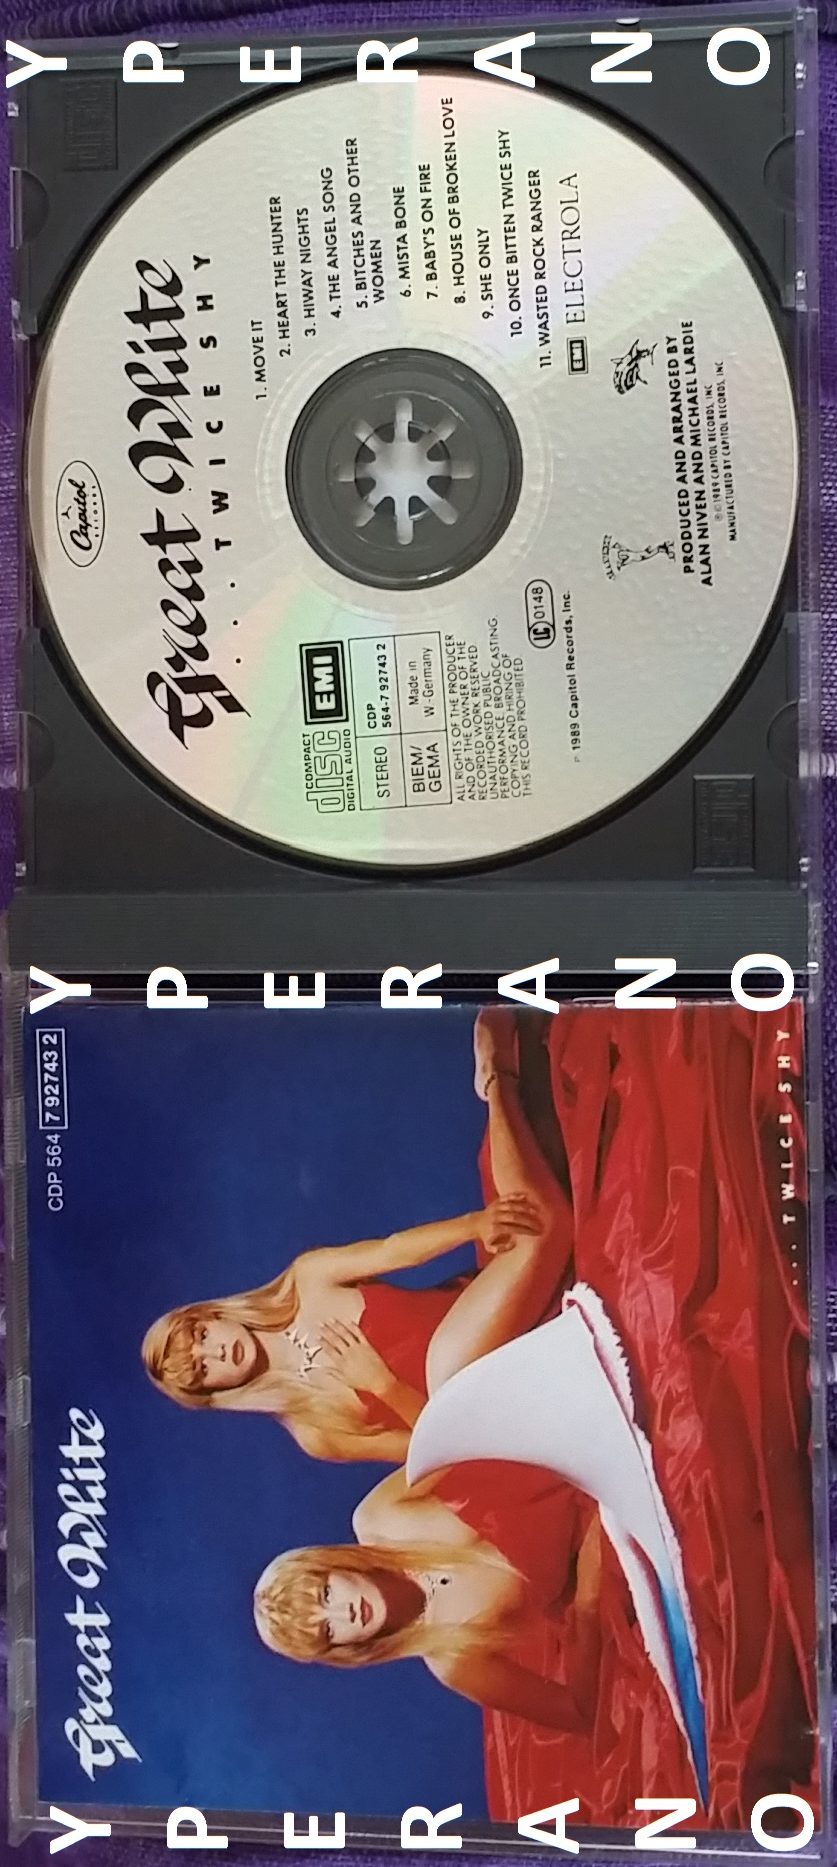 Great White Twice Shy Cd Original 1st Issue 19 Once Bitten Twice Shy House Of Broken Love The Angel Song Mistah Bone Great Rockers Ballads Check Videos Yperano Records